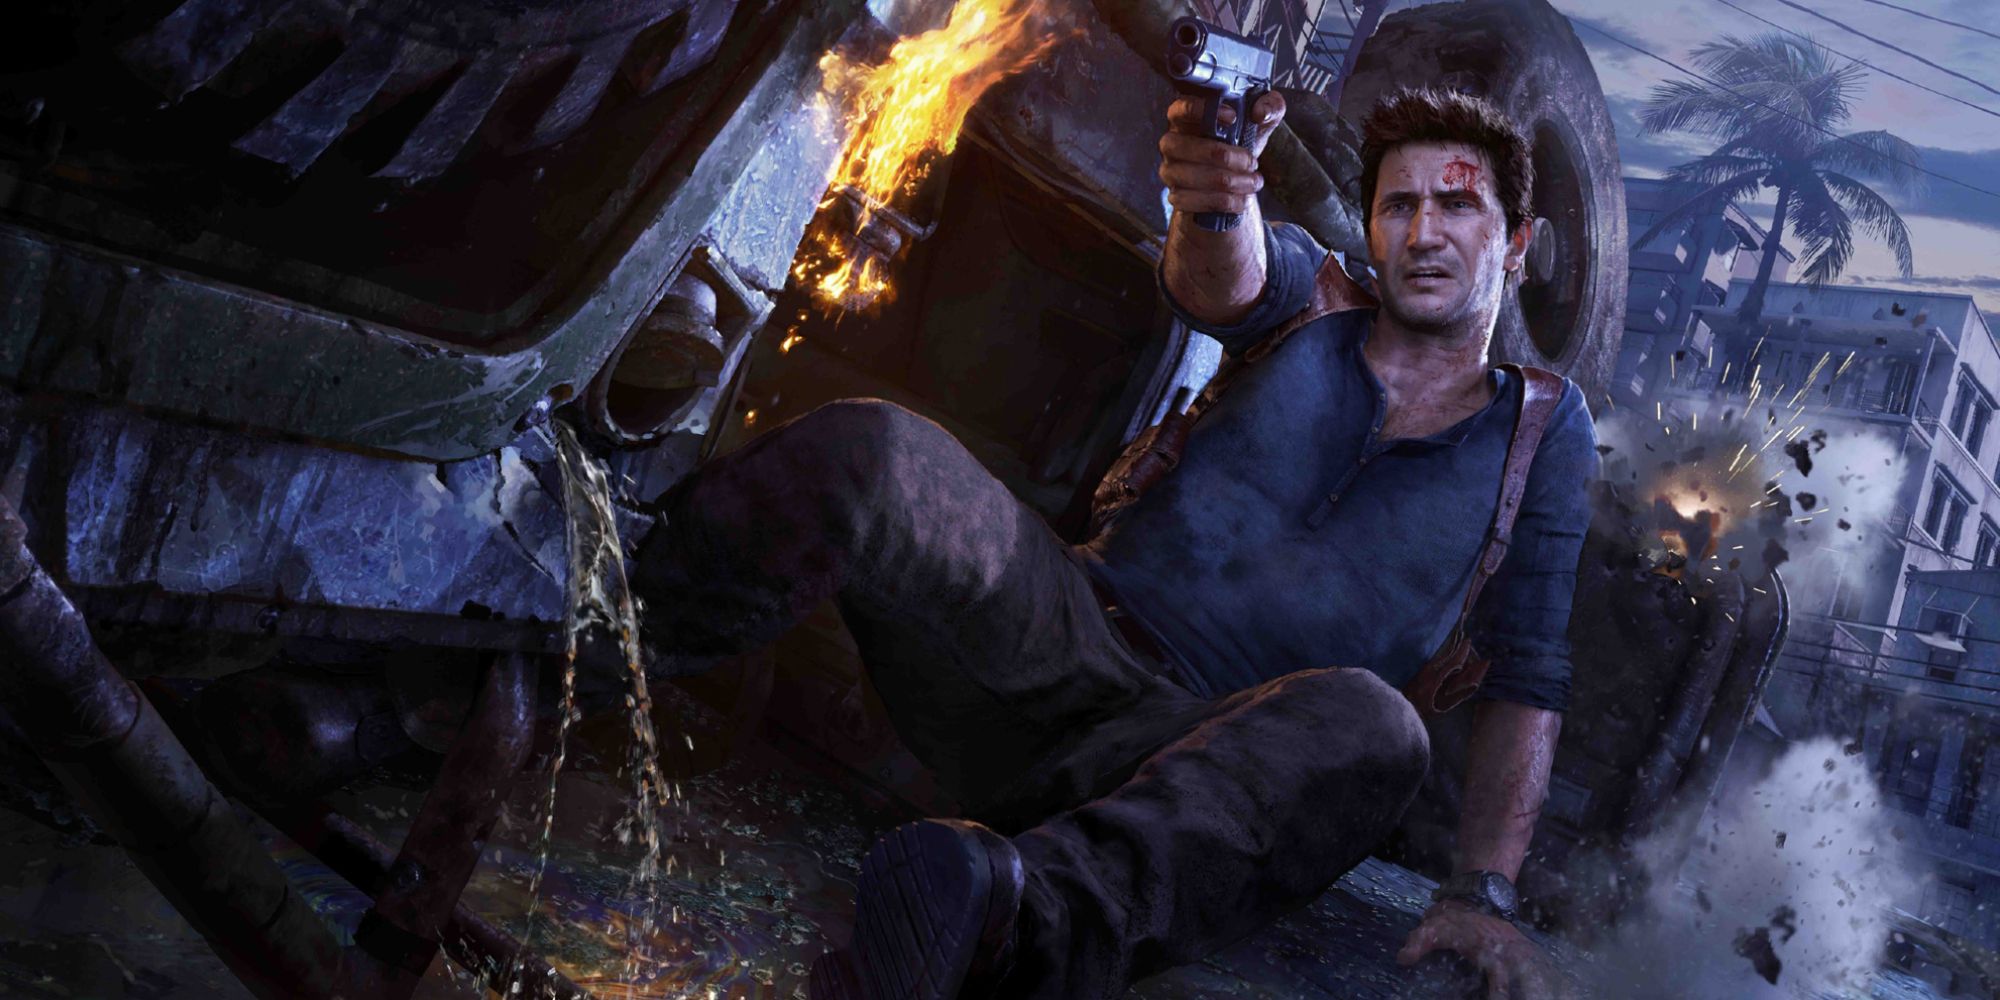 Nathan Drake sat in a car wreckage pointing a gun off out of frame